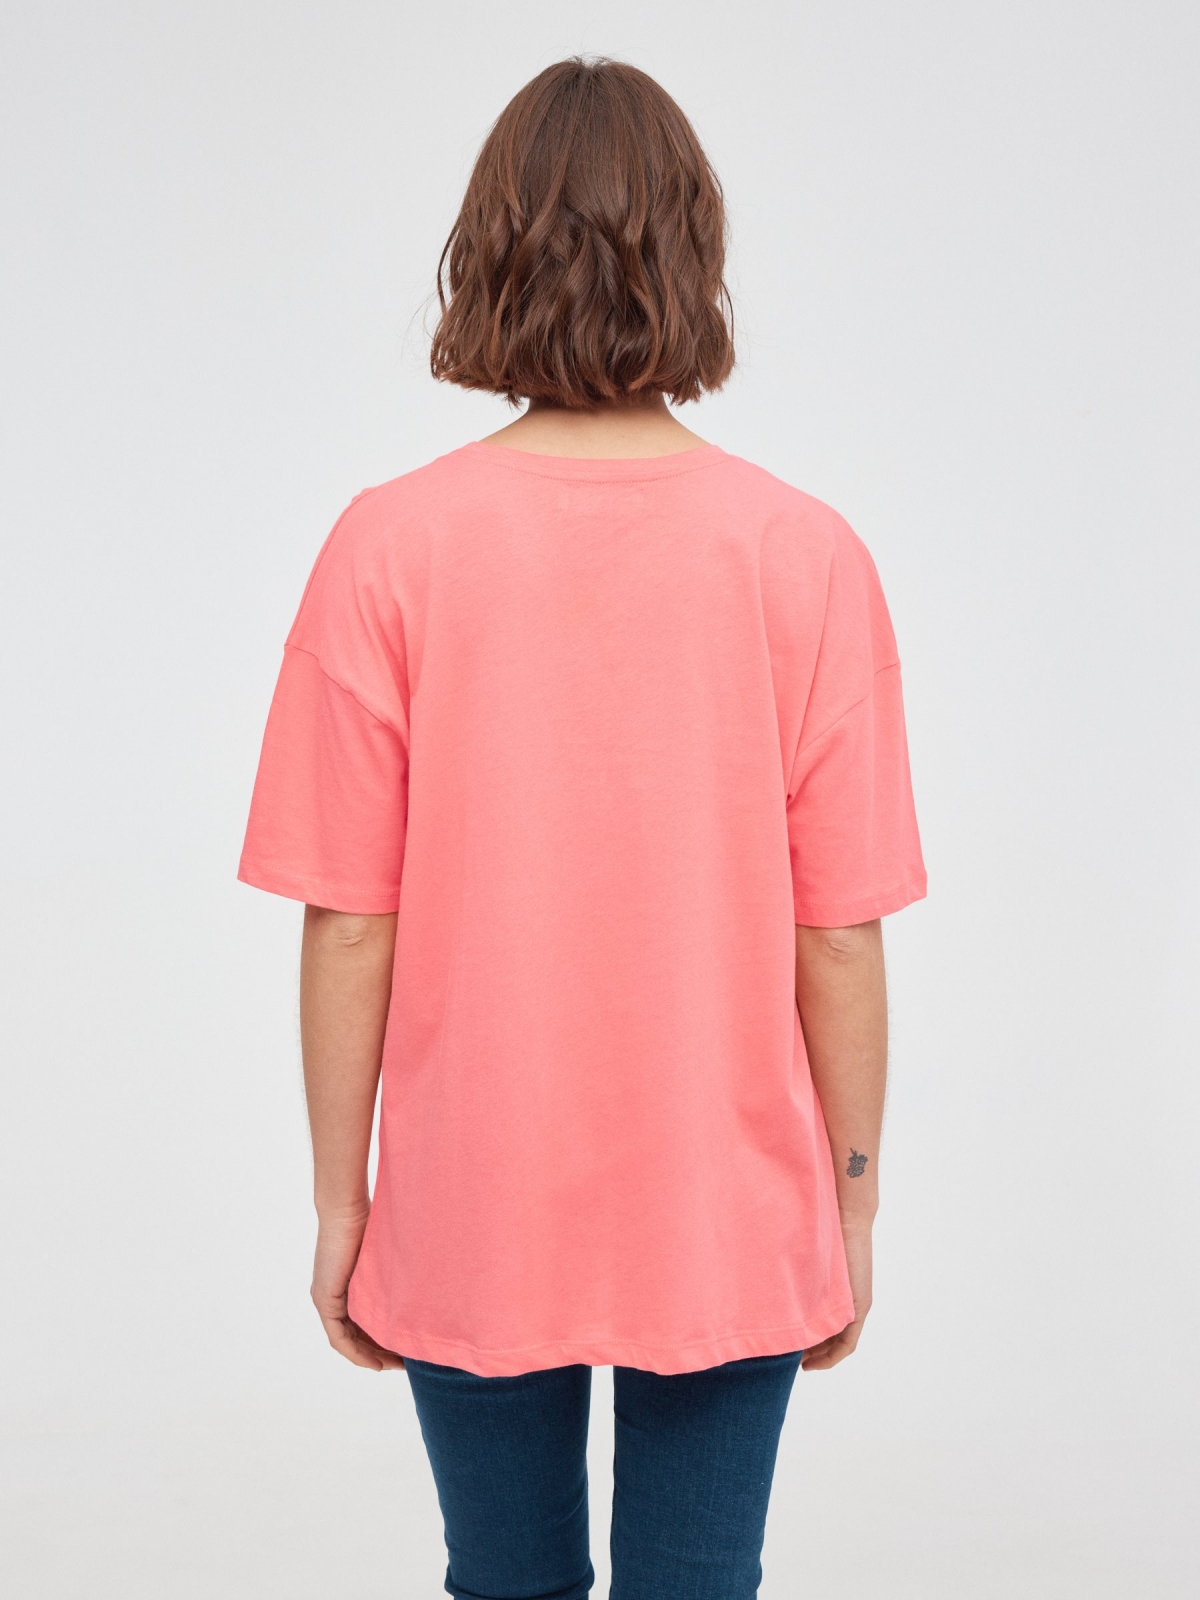 Burguer oversize t-shirt coral middle back view